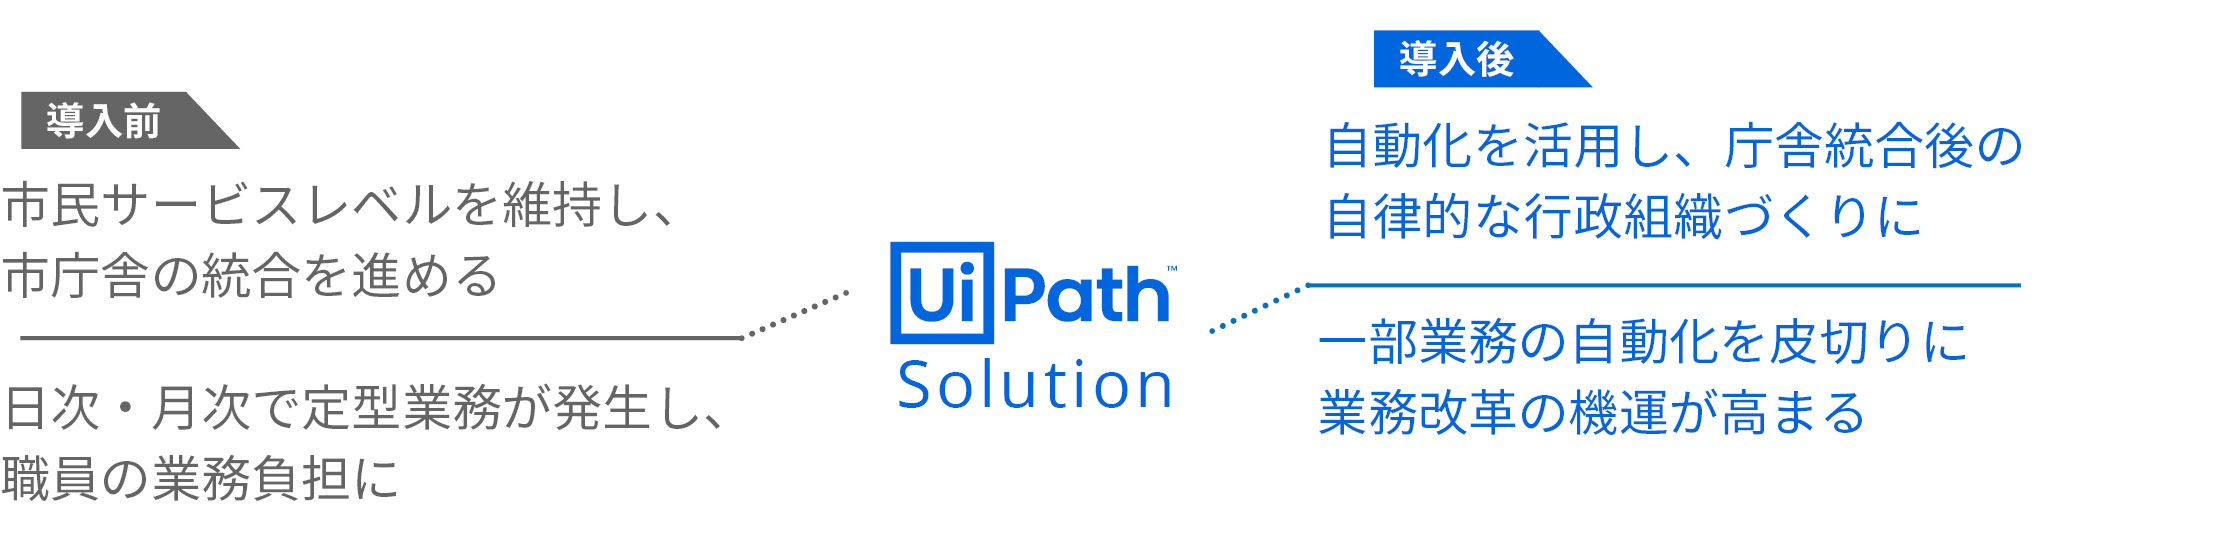 Nanto-shi_solution_overview